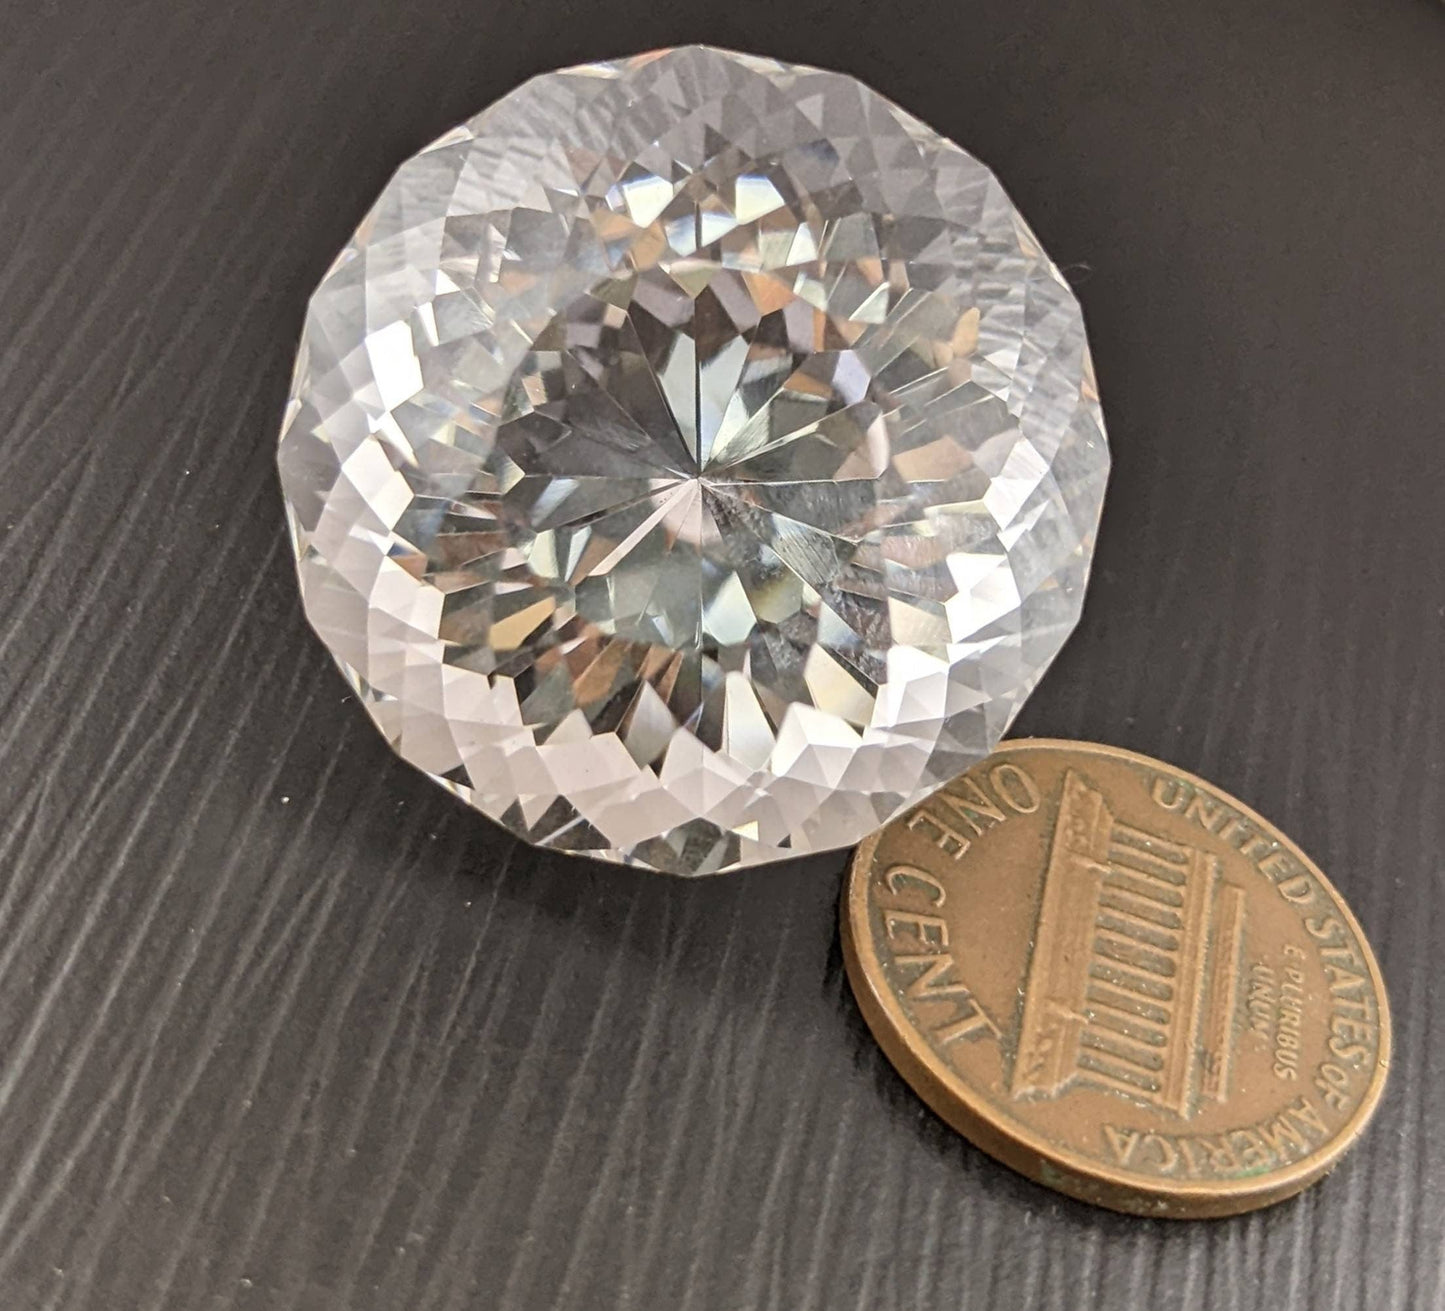 ARSAA GEMS AND MINERALSQuartz faceted gem, eye clean clarity and round cut shape, 79 carats - Premium  from ARSAA GEMS AND MINERALS - Just $80.00! Shop now at ARSAA GEMS AND MINERALS